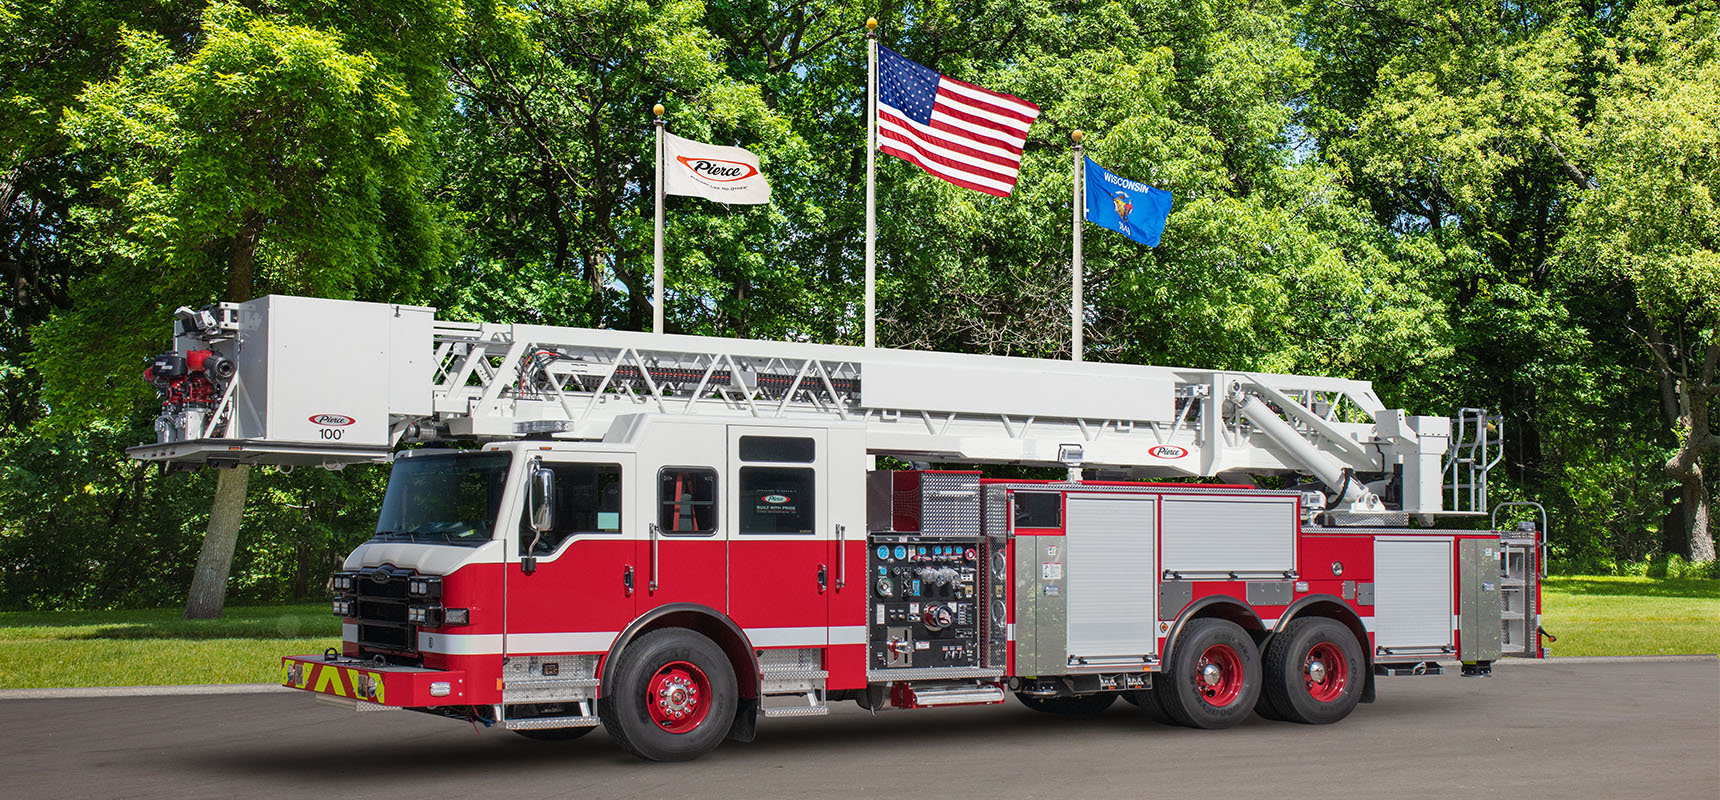 Cleveland Ohio Fire Department takes delivery of Pierce 100' Aerial Platform